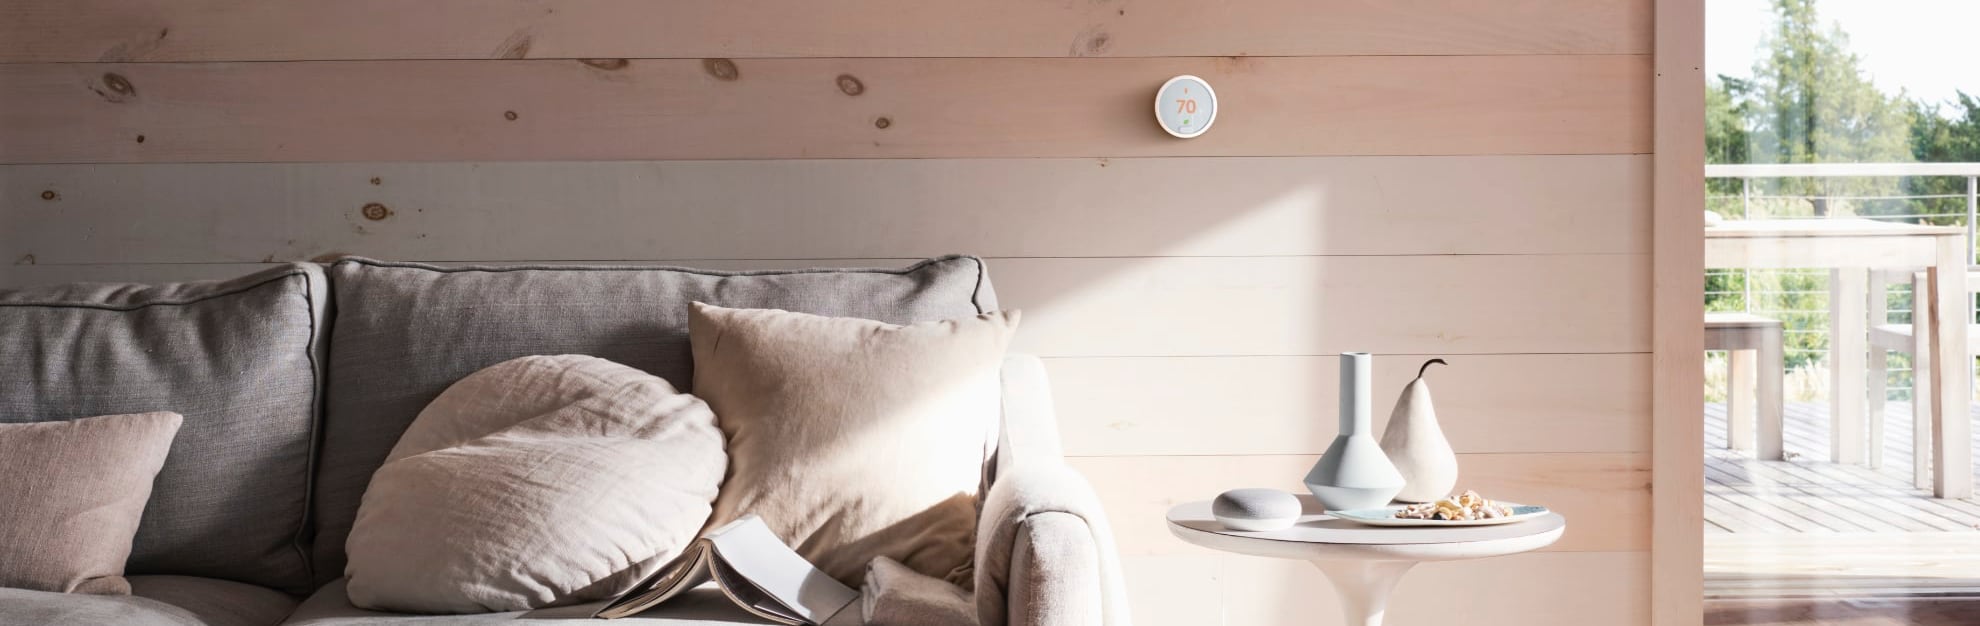 Vivint Home Automation in Appleton